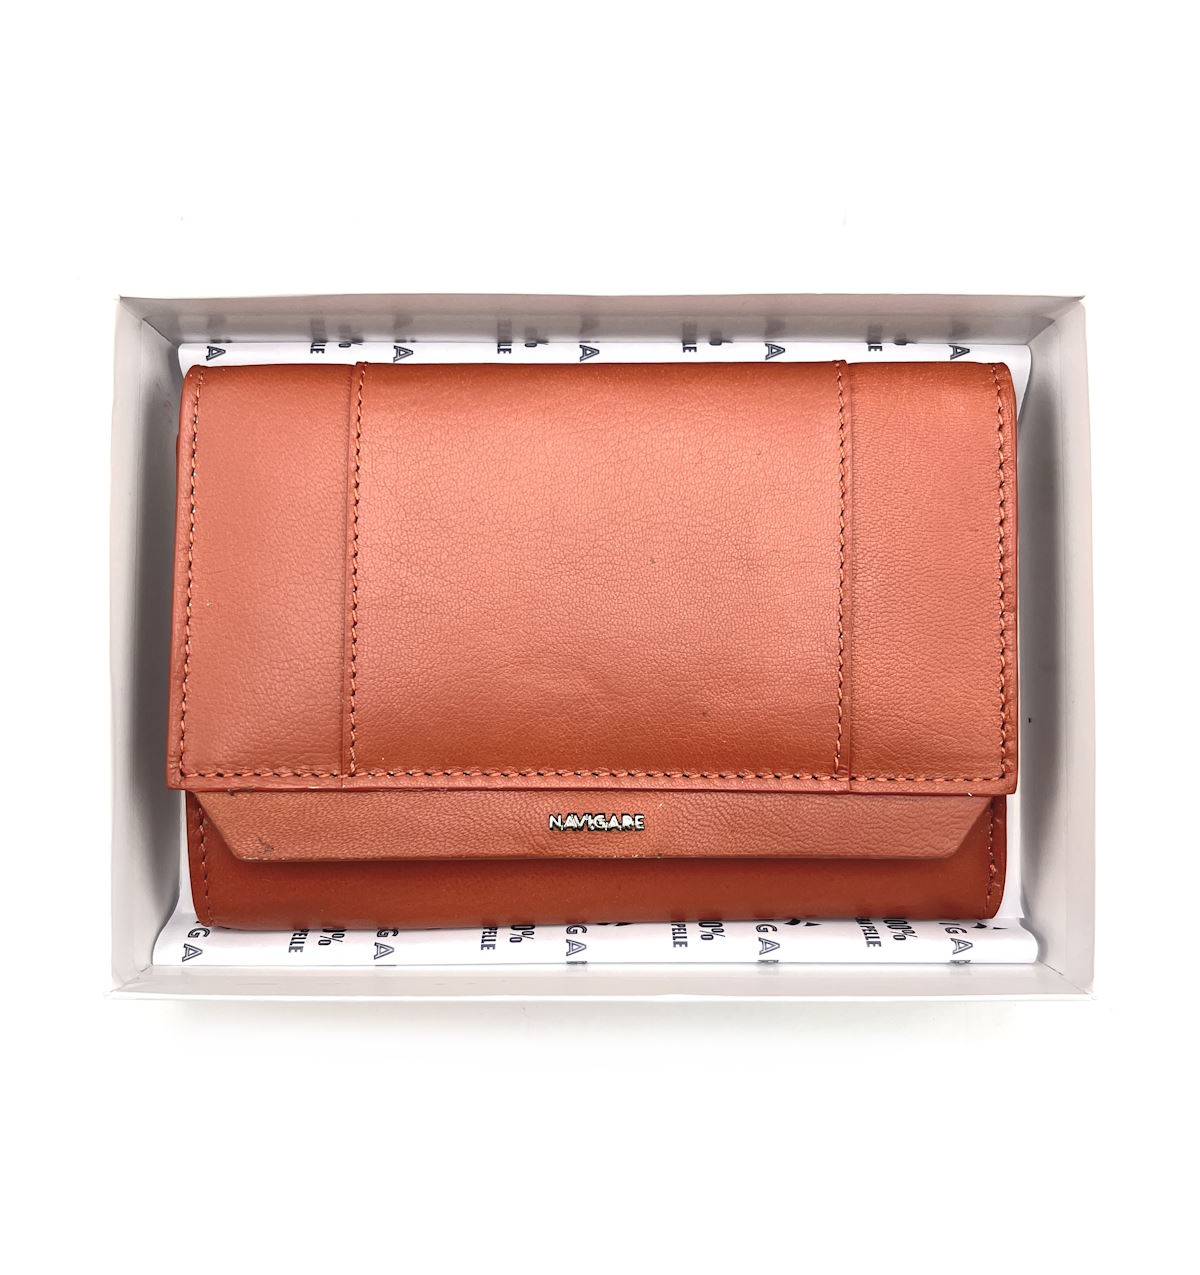 Genuine leather wallet, Navigare for women, art. PF791-56